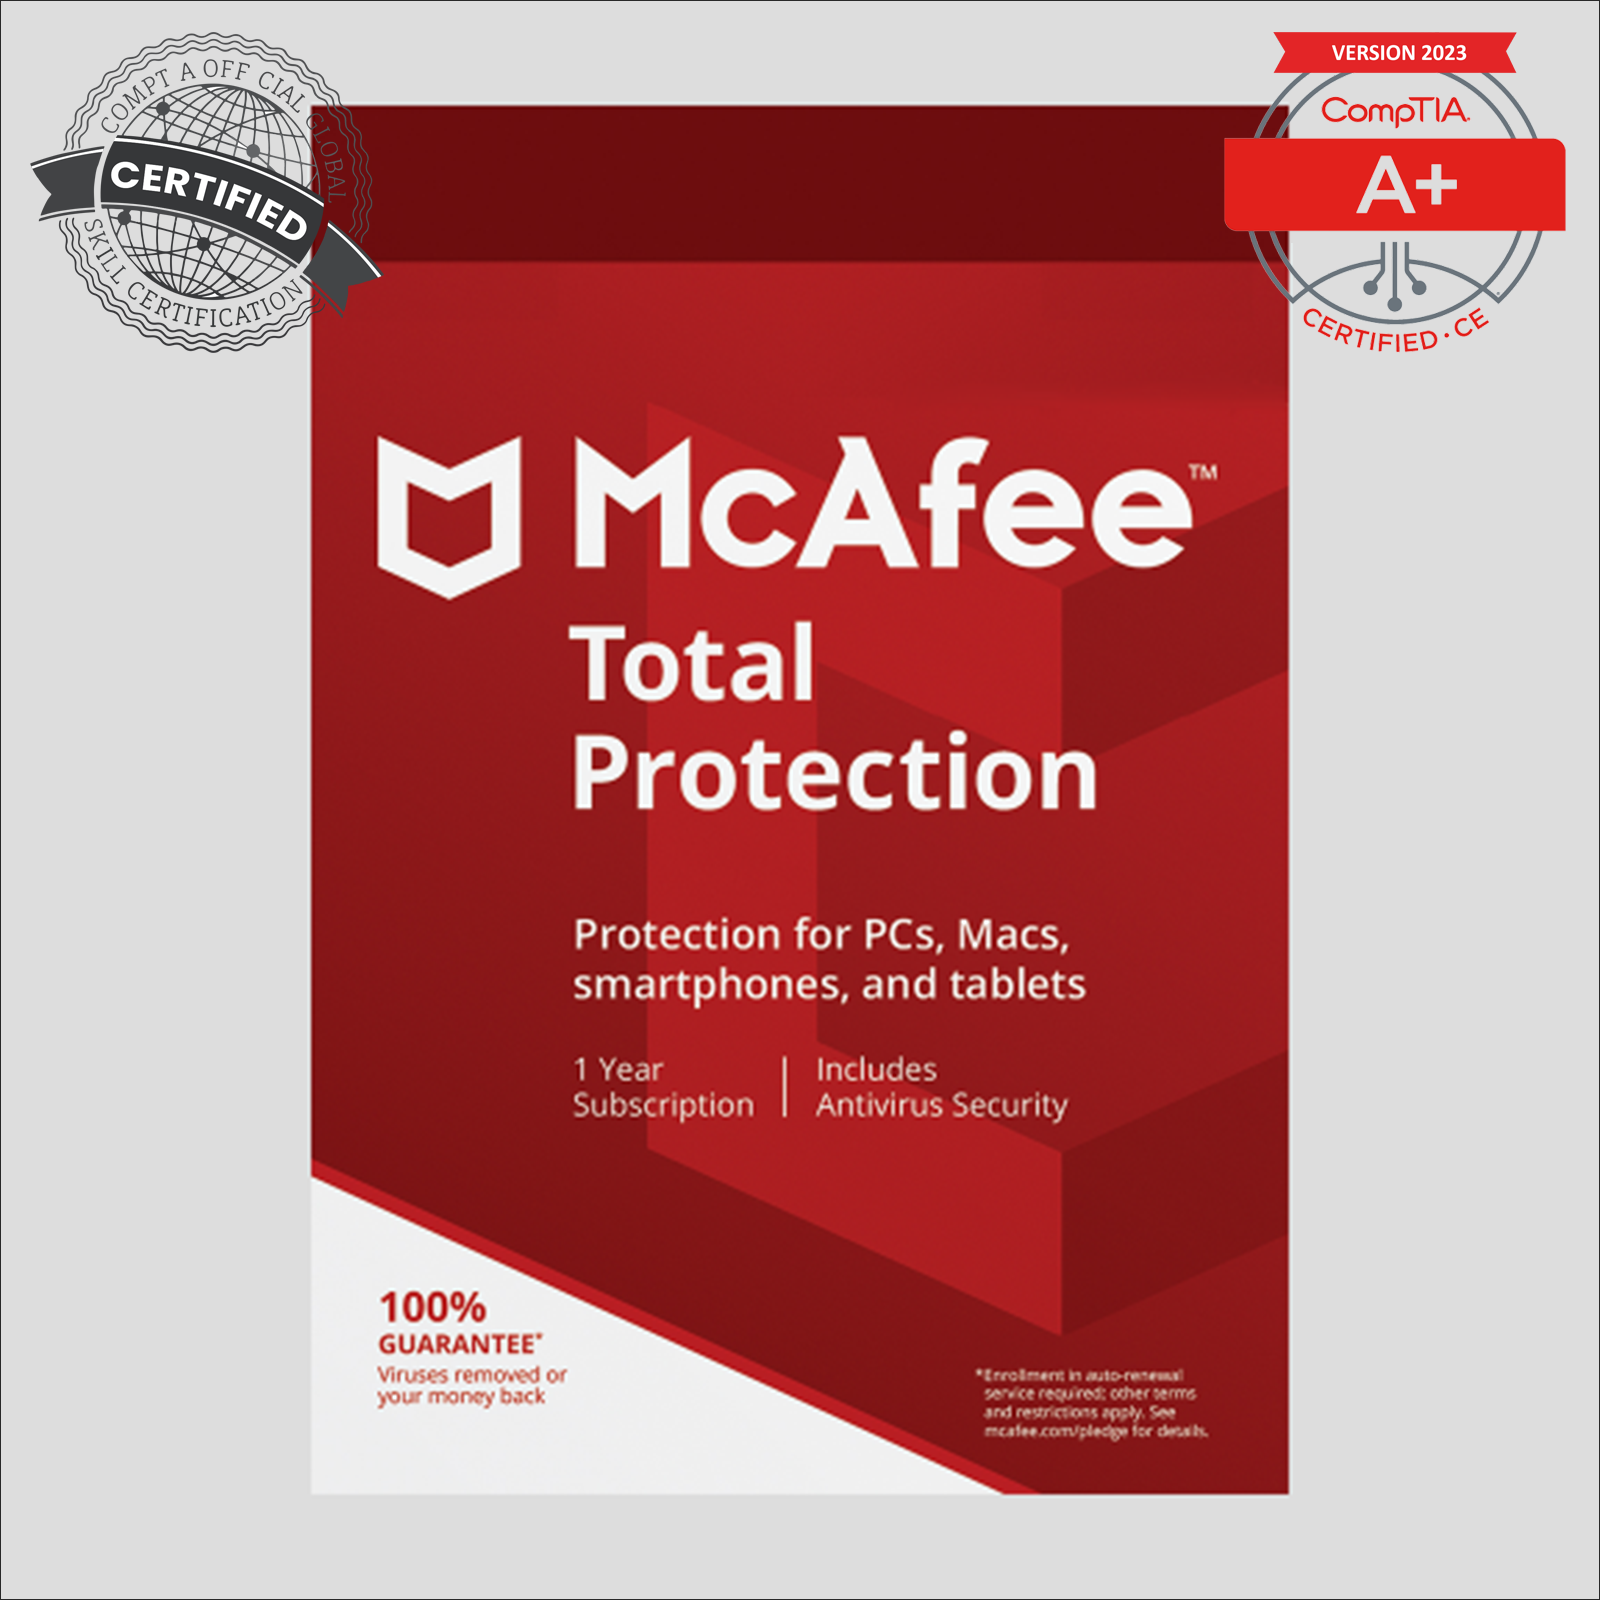 McAfee Total Protection - 1-Year / 10-Devices - USA/Canada